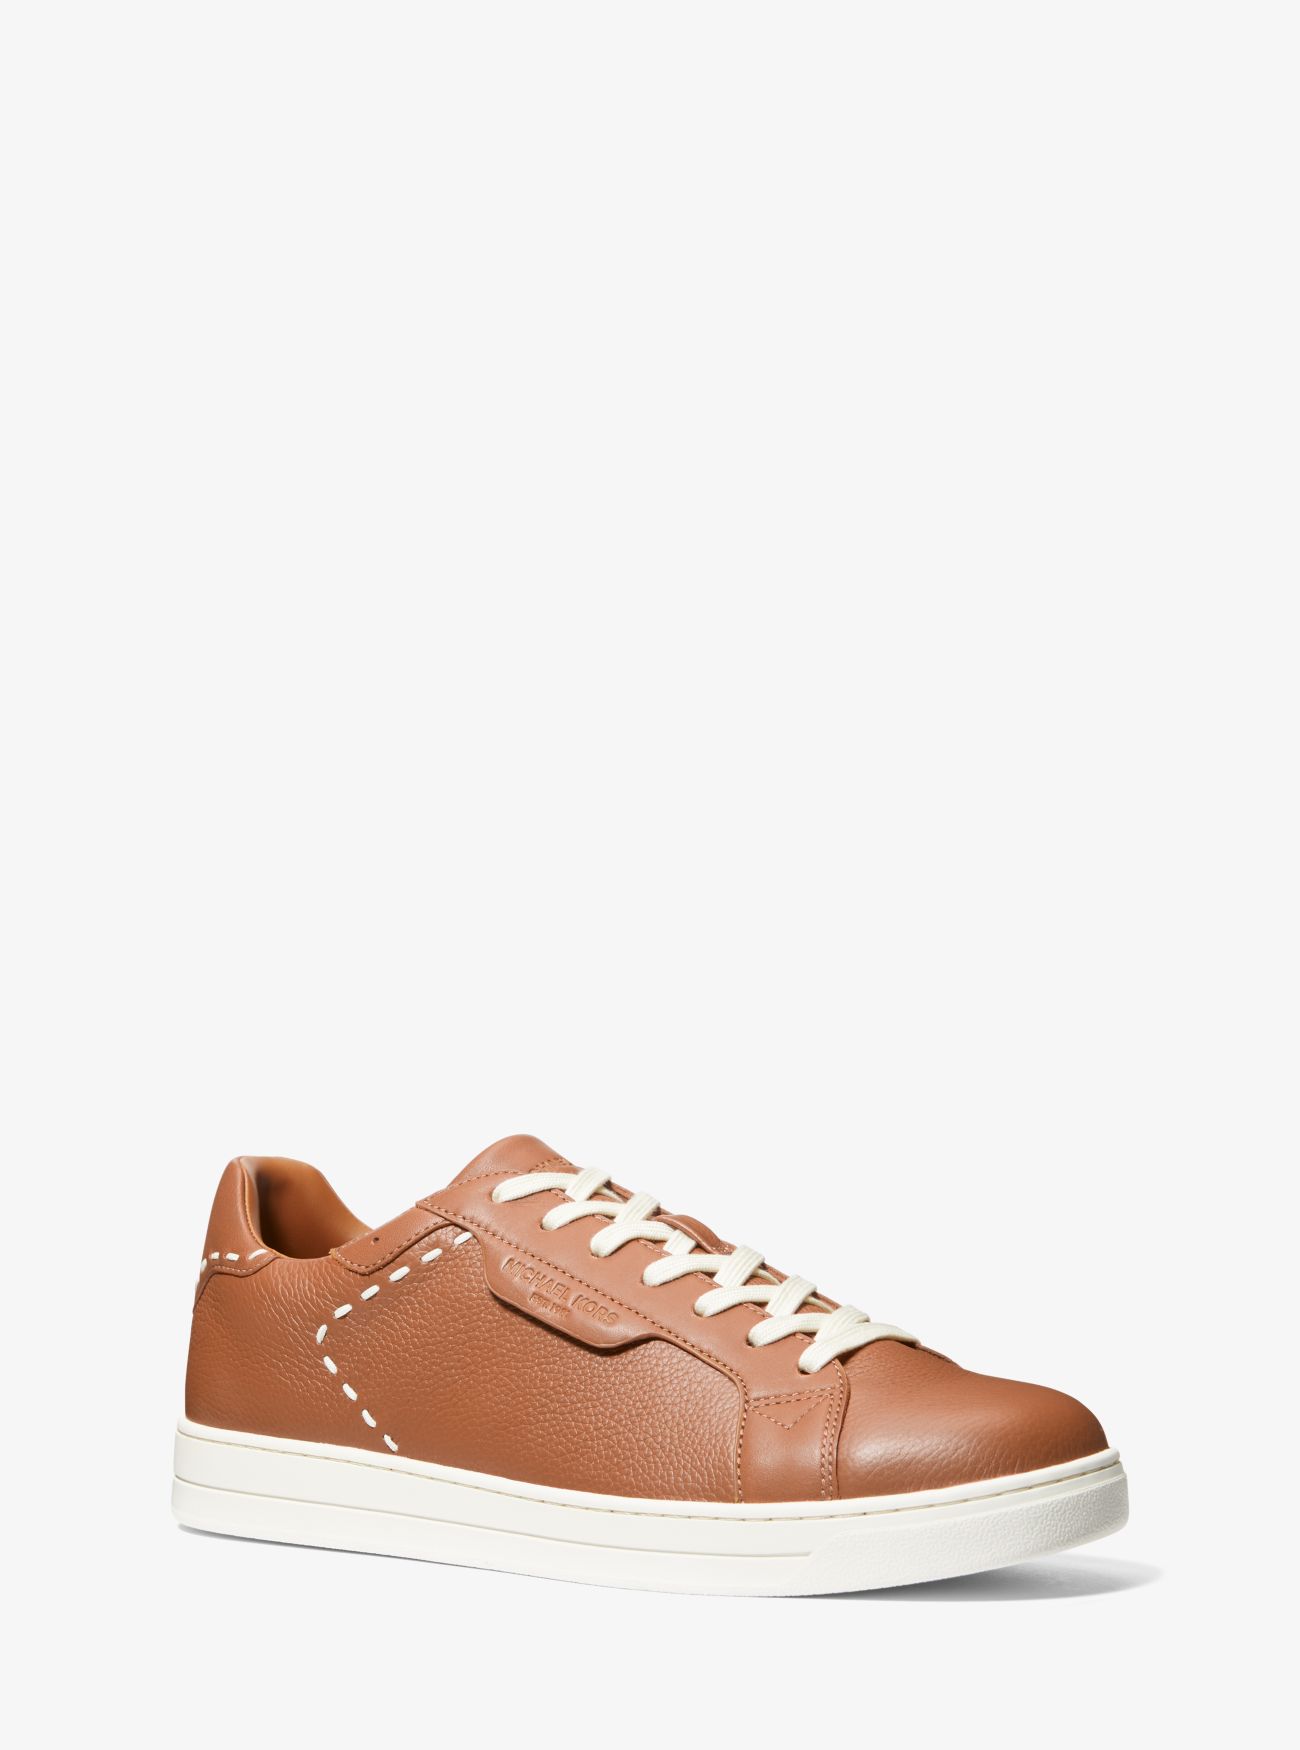 MK Keating Hand-Stitched Leather Trainers - Brown - Michael Kors